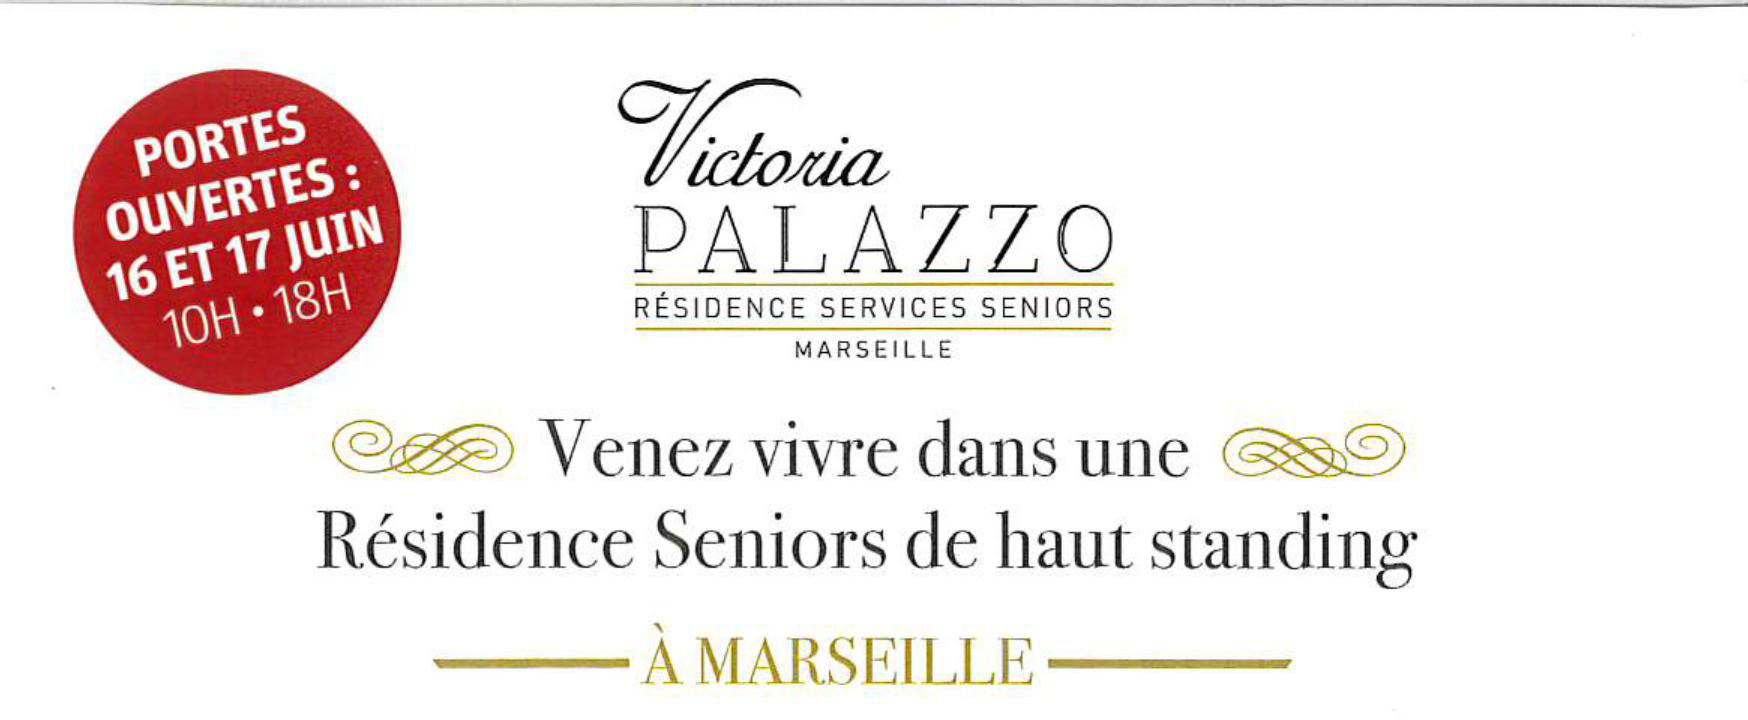 Flyer-Residence-Palazzo-portes-ouvertes2